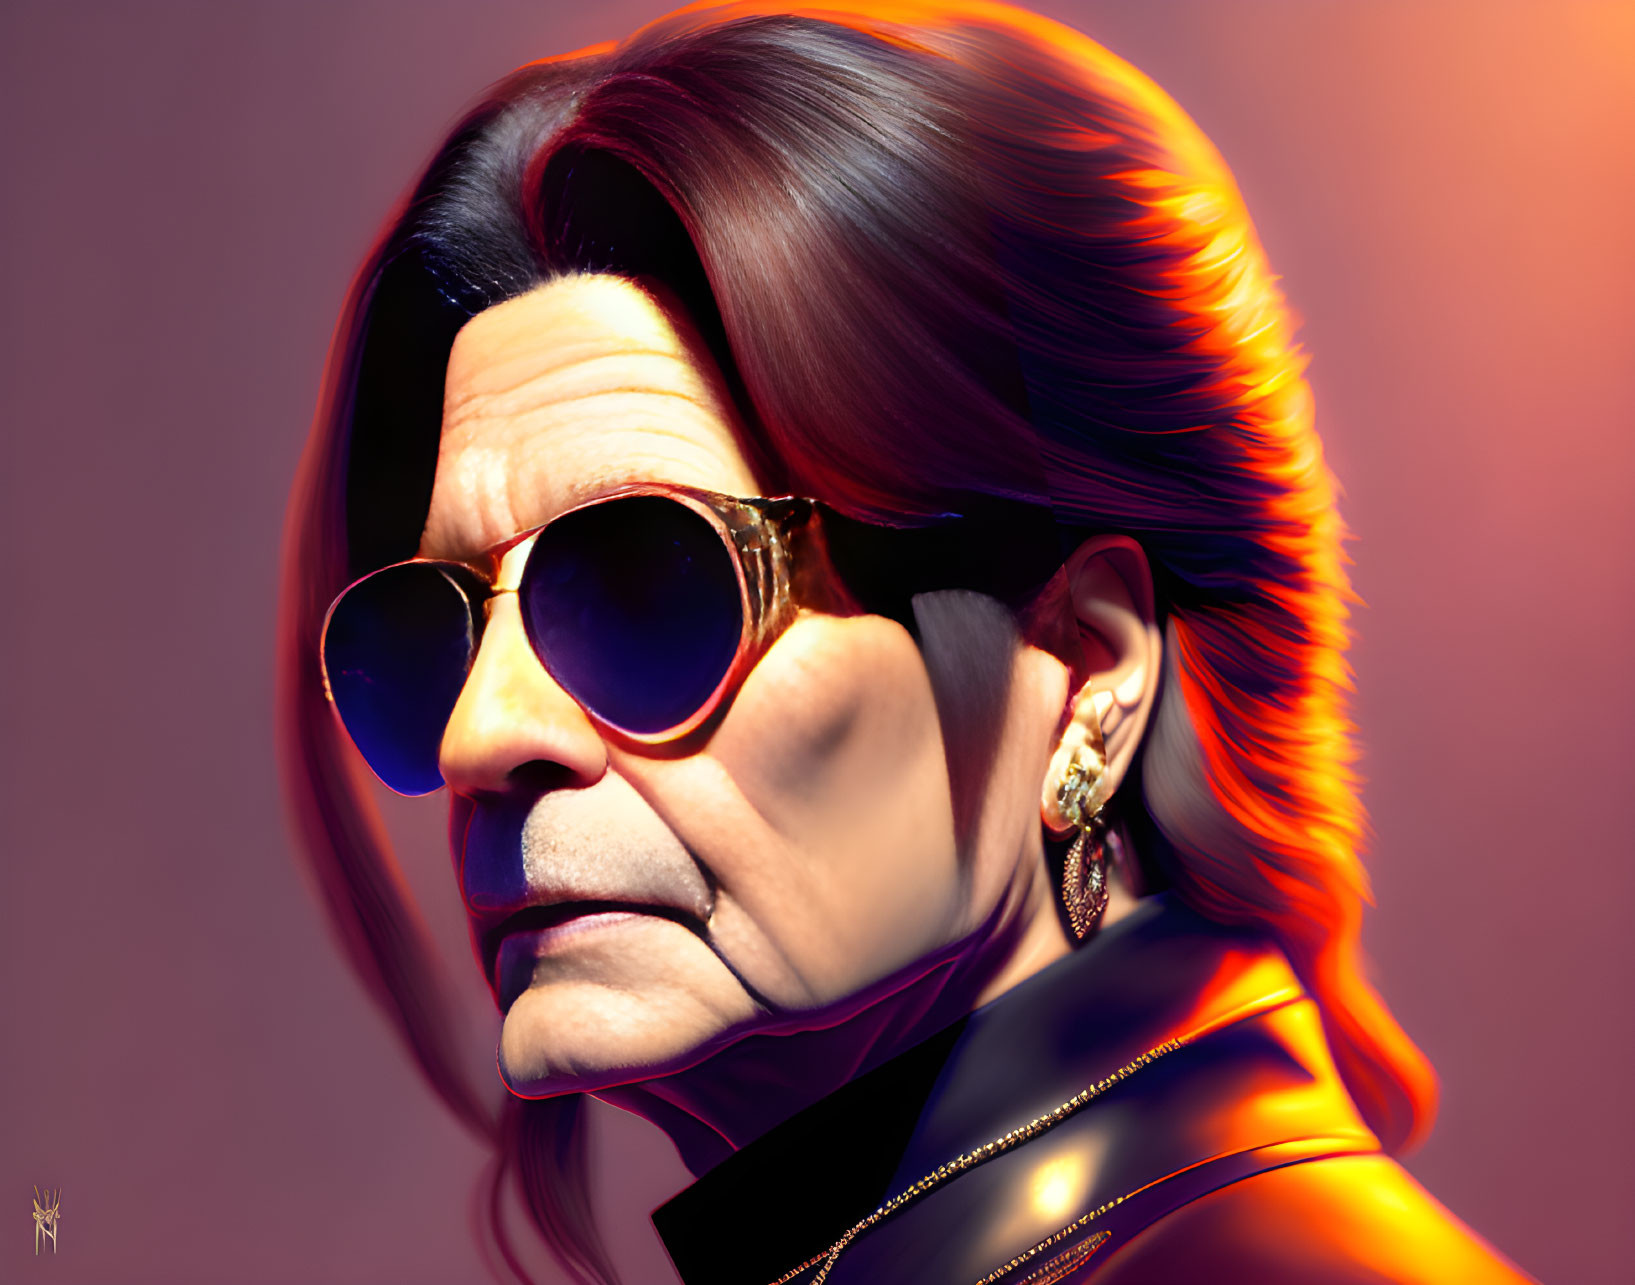 Person with Sunglasses and Leather Jacket: Intense Gaze, Styled Hair